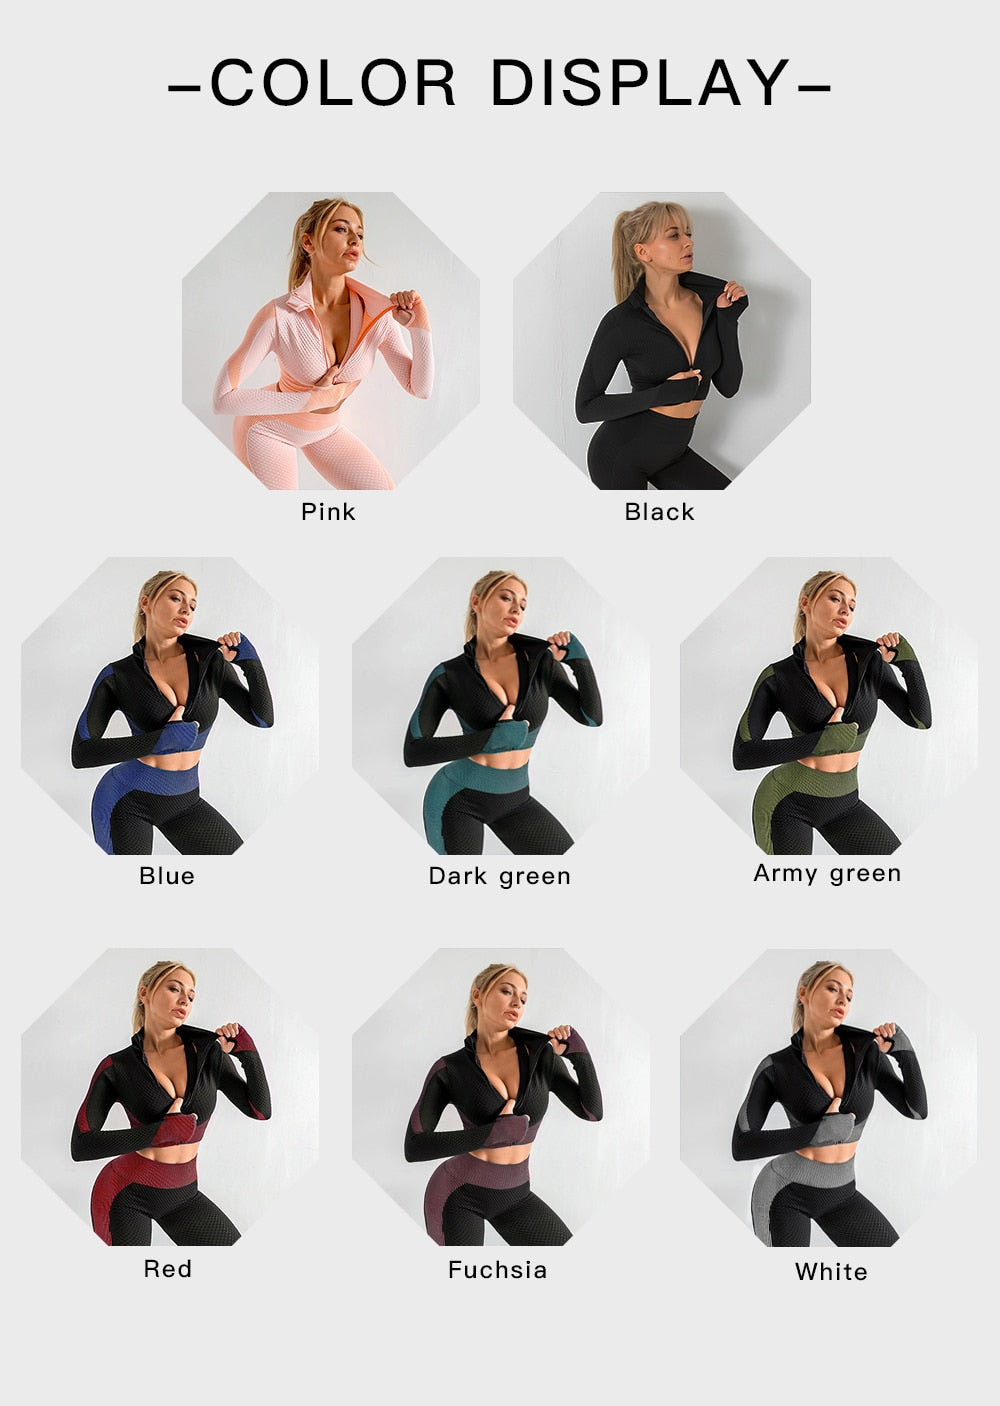 Women Fitness Sport Yoga Suit Seamless Women Yoga Sets Long Sleeve Yoga Clothing Female Sport Gym Suits Wear Running Clothes - LiveTrendsX